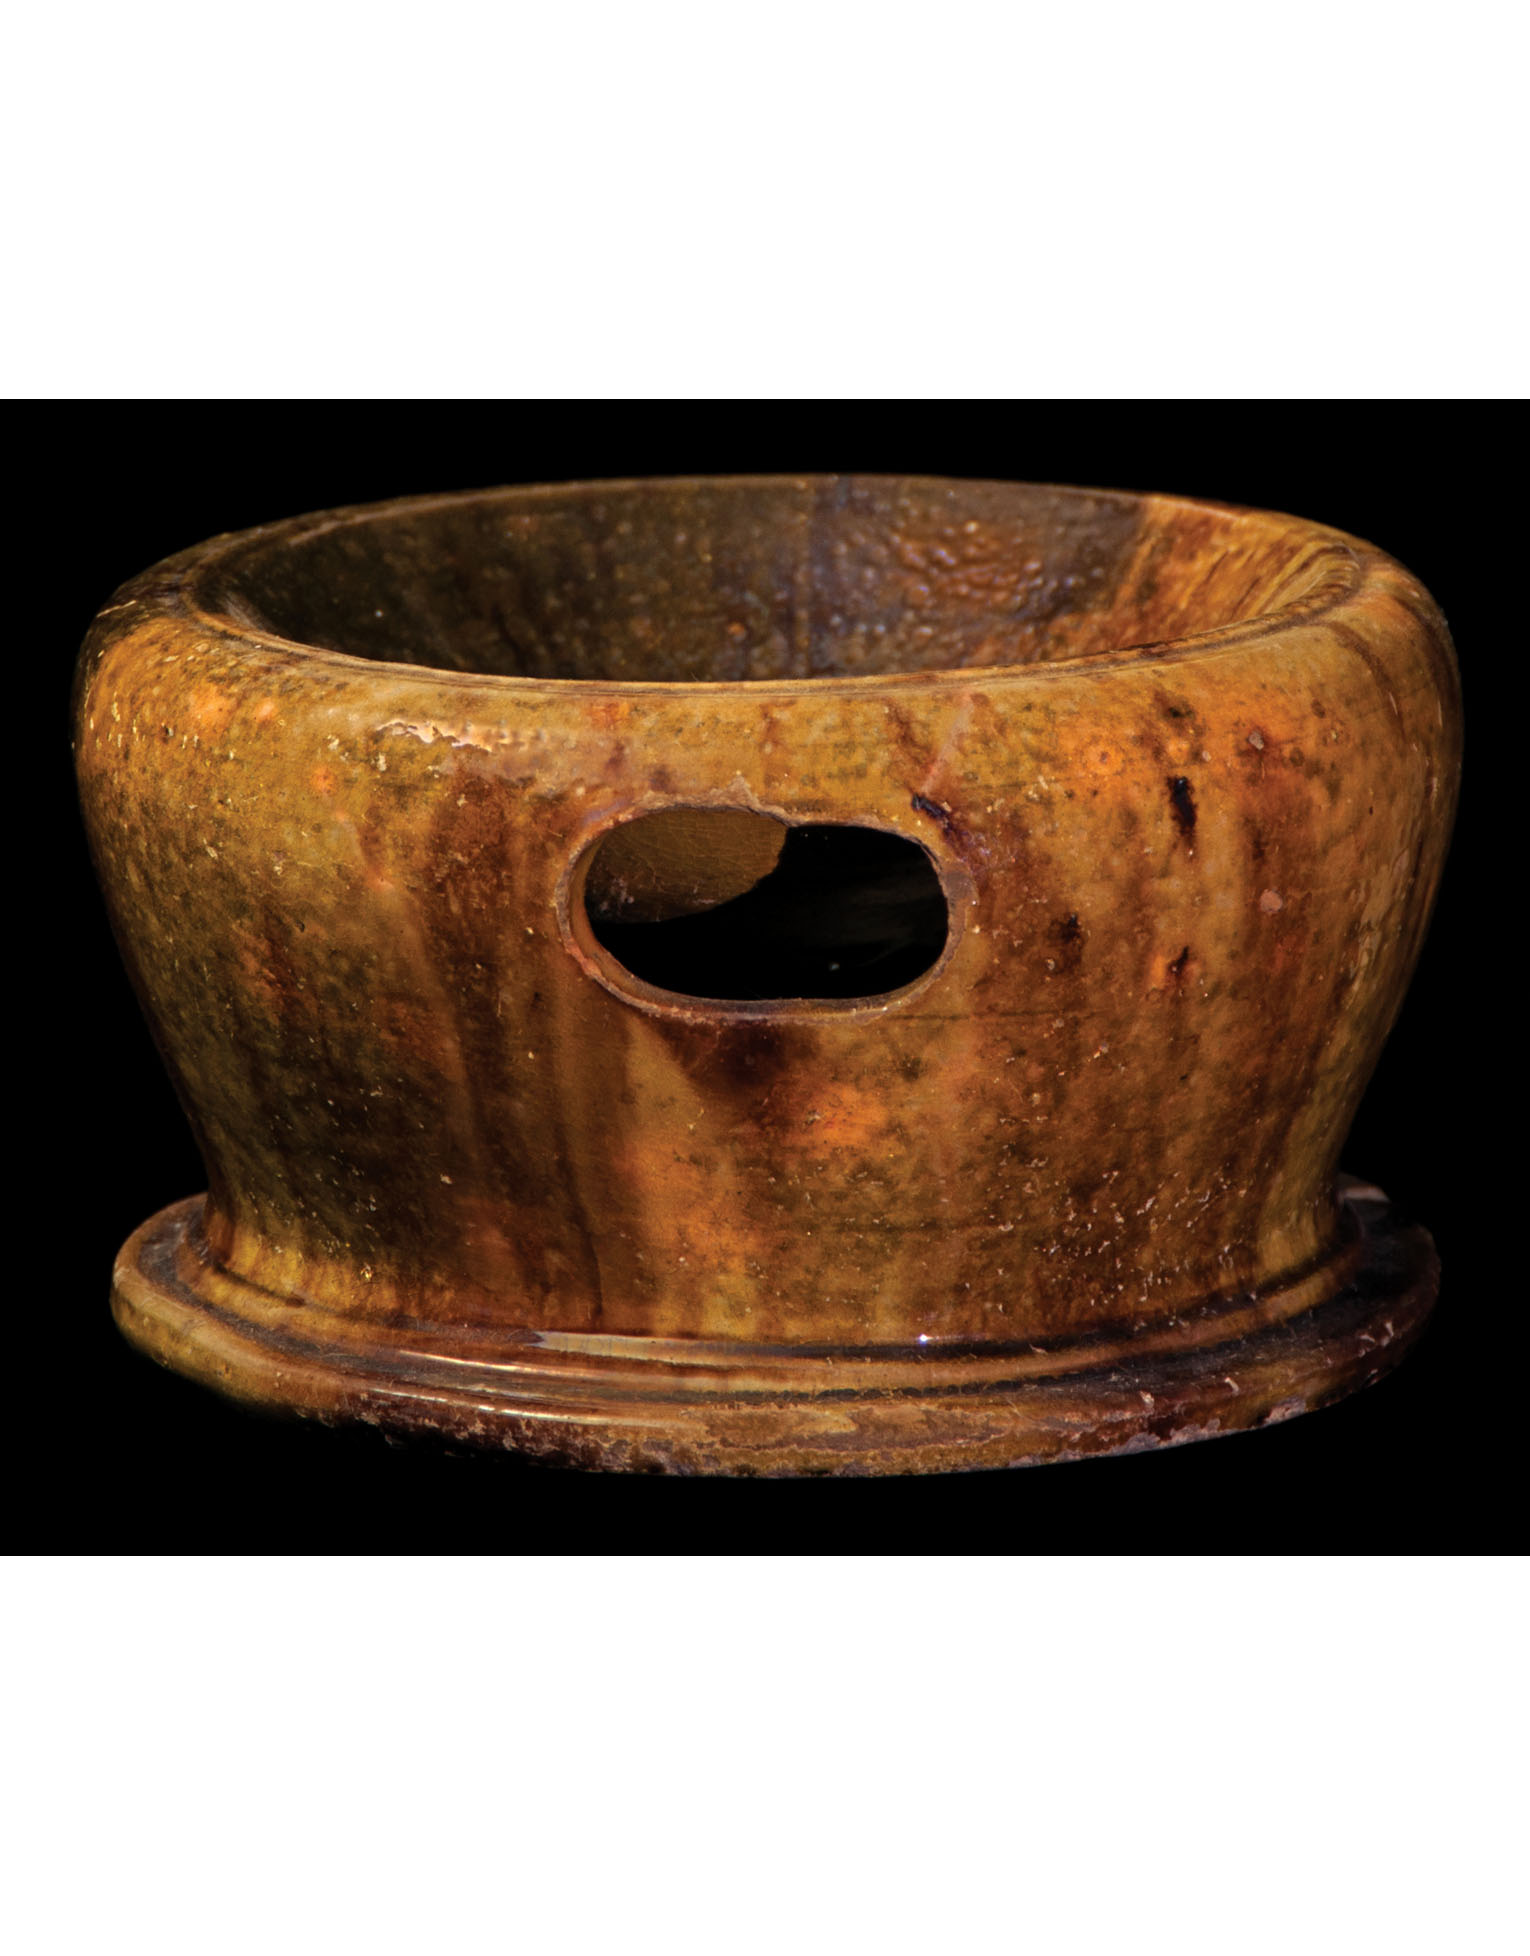 Lot 115C: 19th C. New England Redware Spittoon